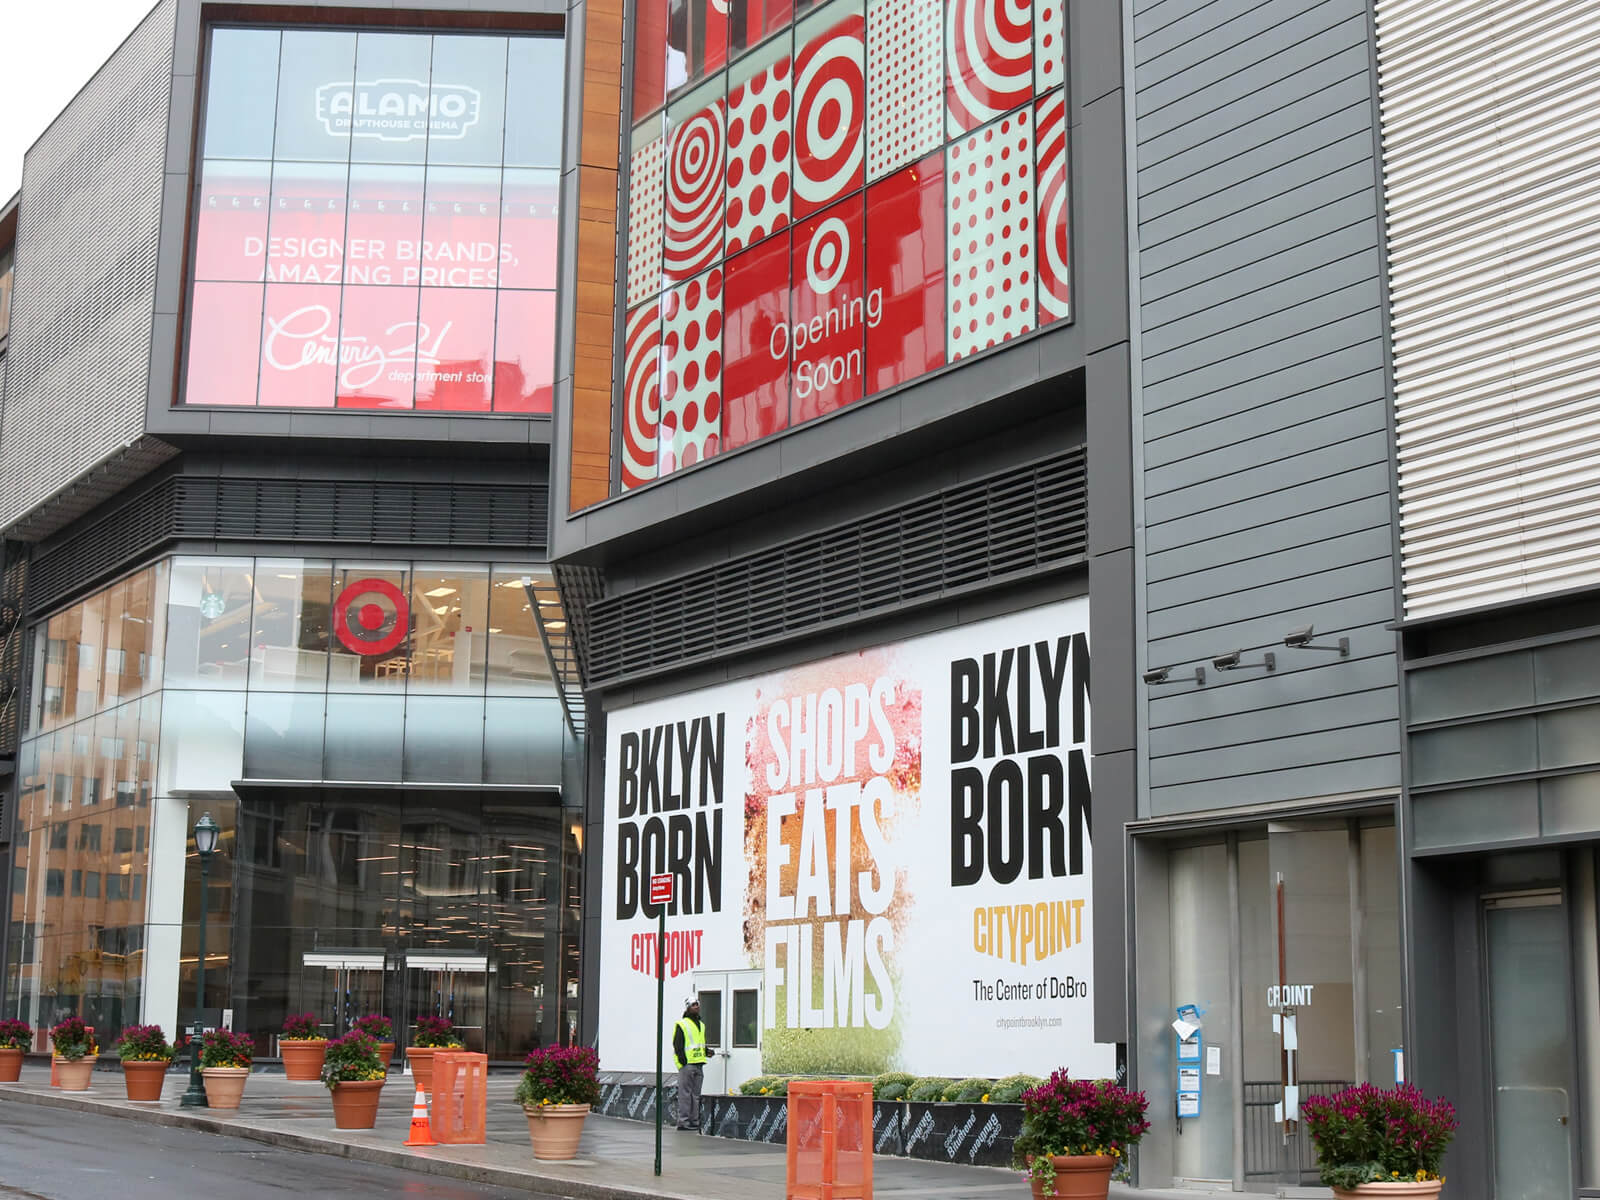 century 21 target alamo drafthouse trader joes brooklyn city point downtown opening